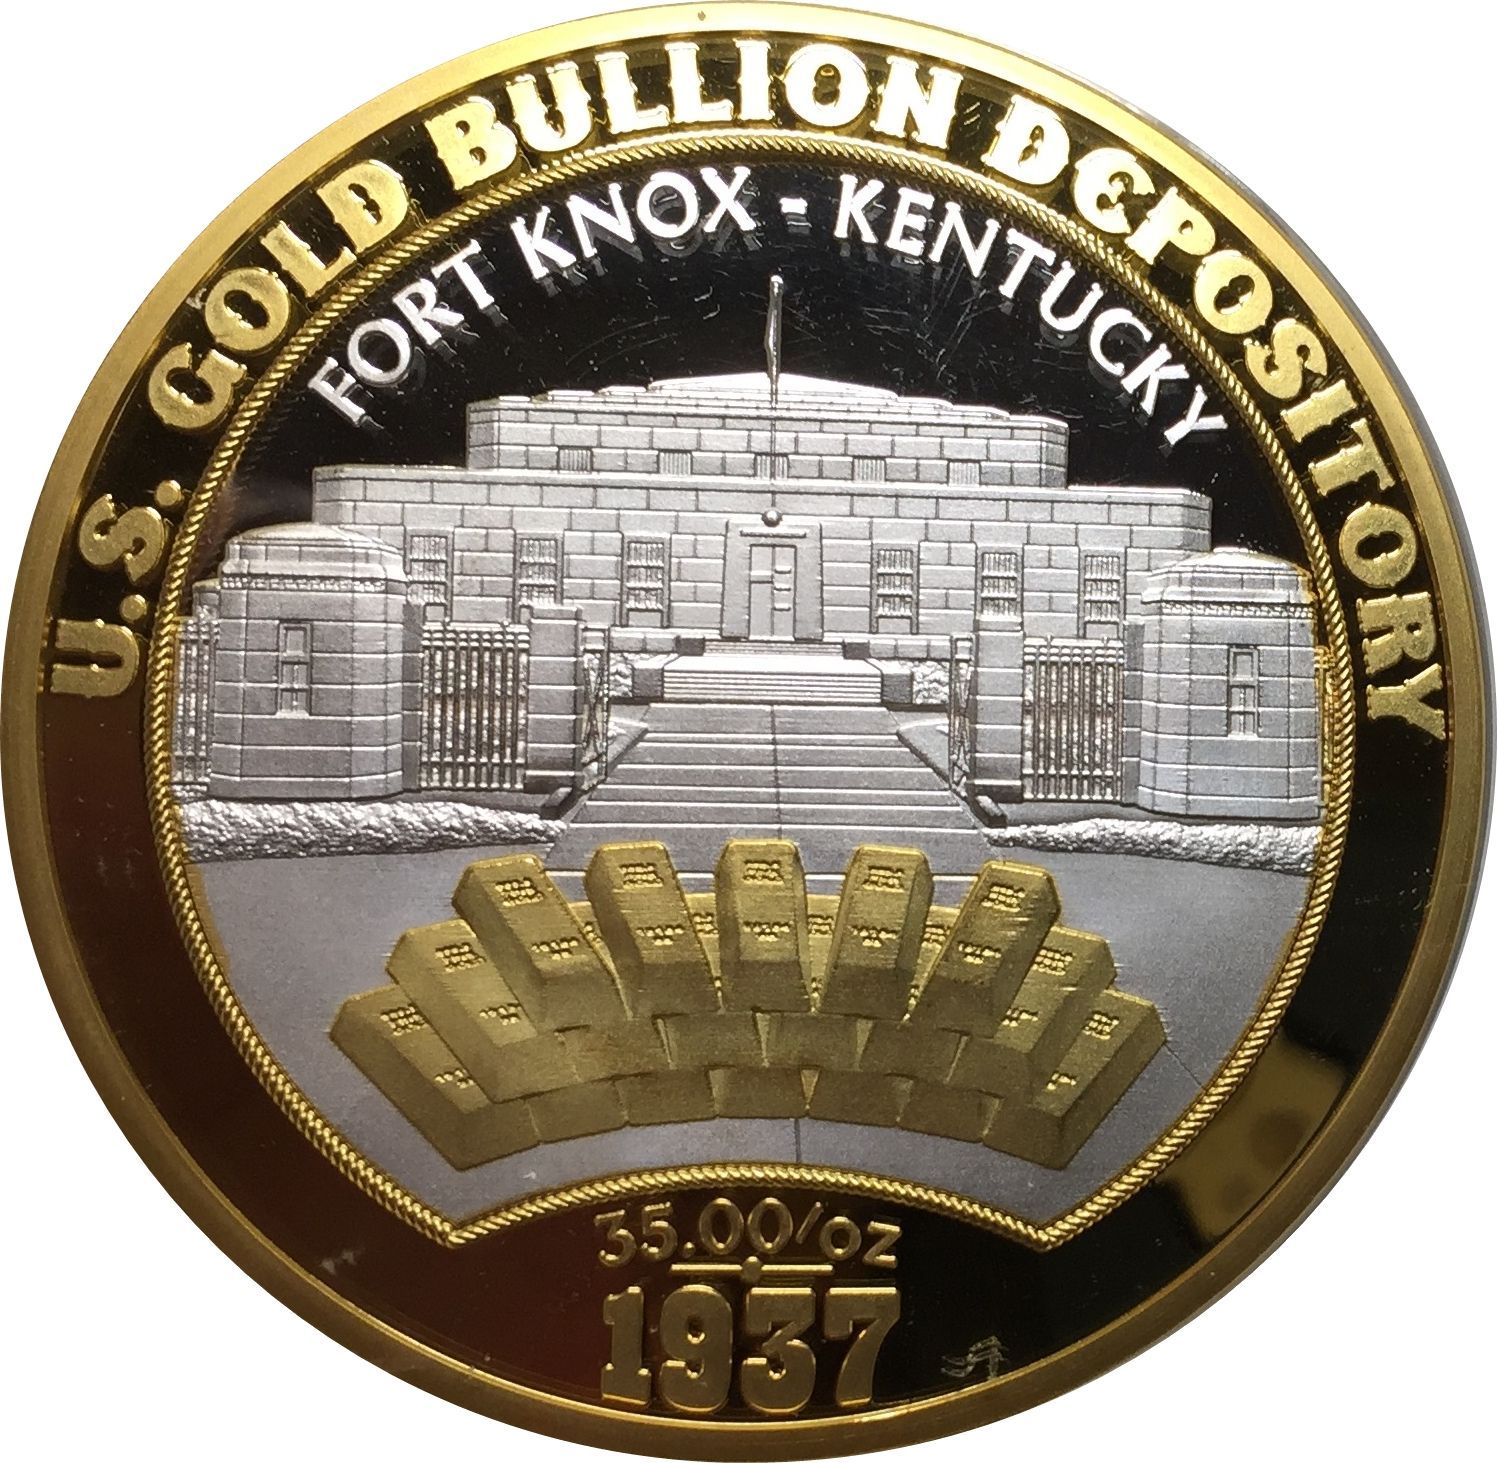 World's Most Secure Vault: world record in Fort Knox, Kentucky